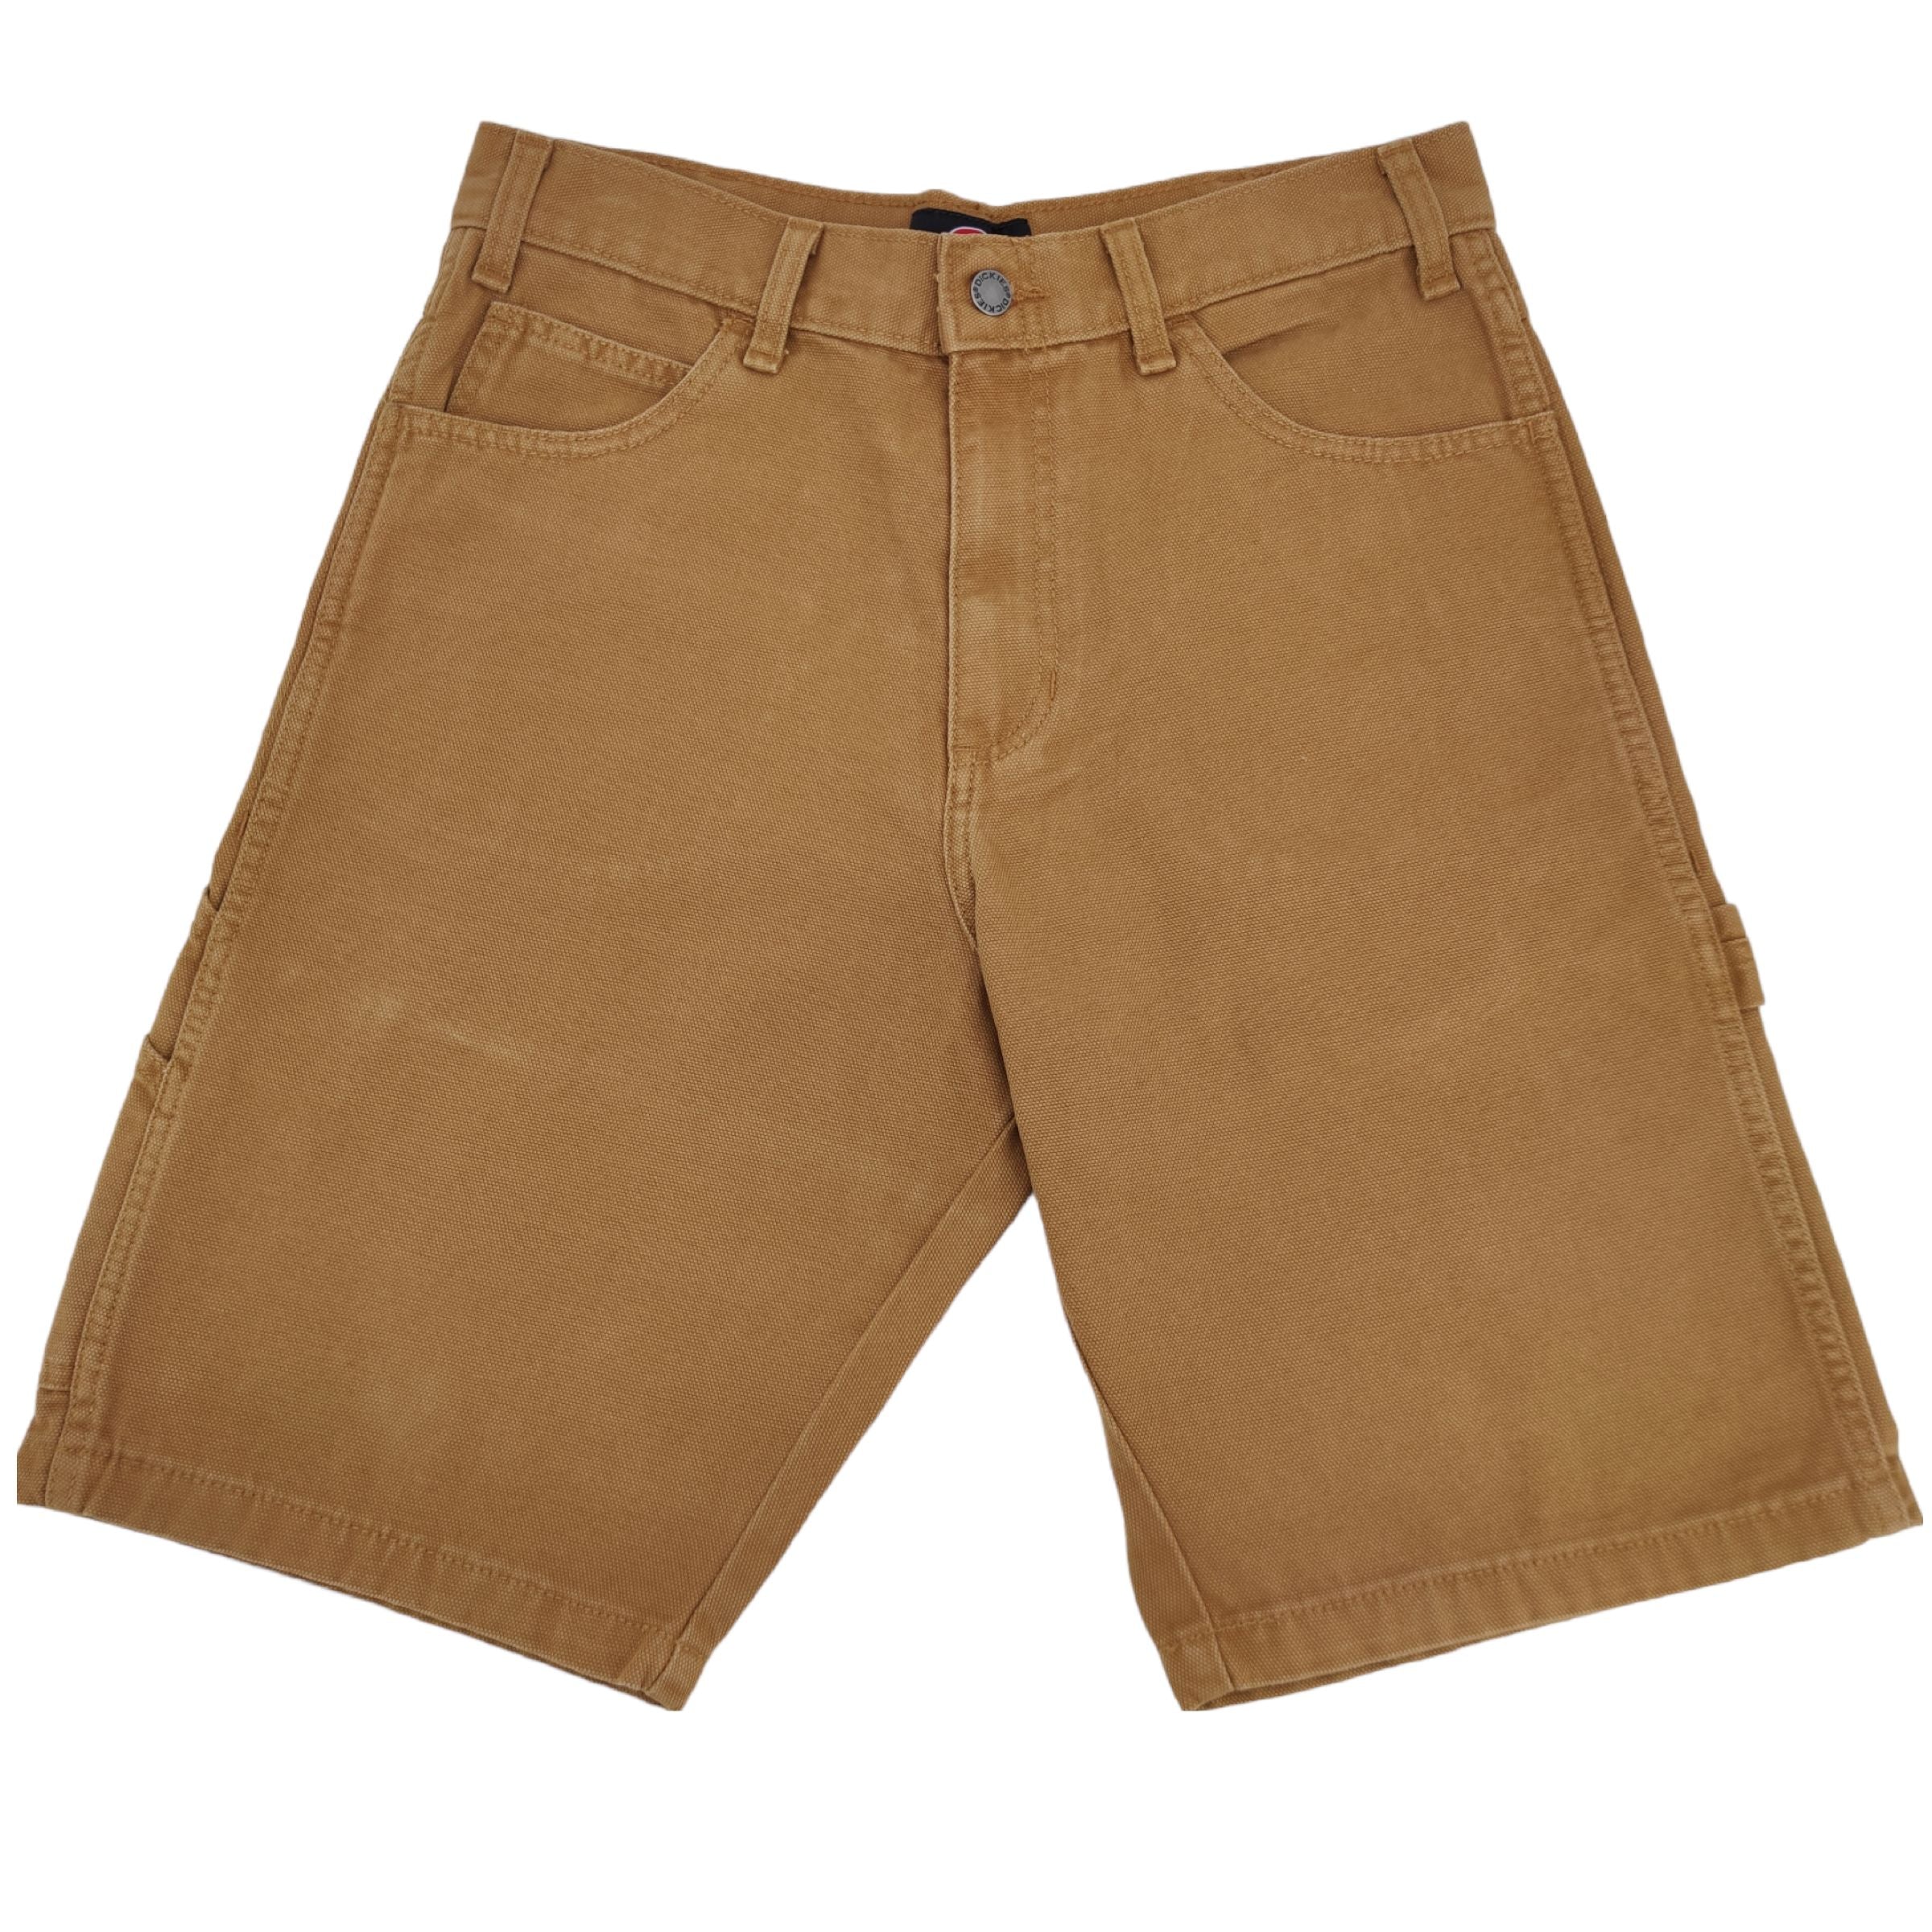 Men's Duck Canvas Shorts Stone Washed Brown Duck 